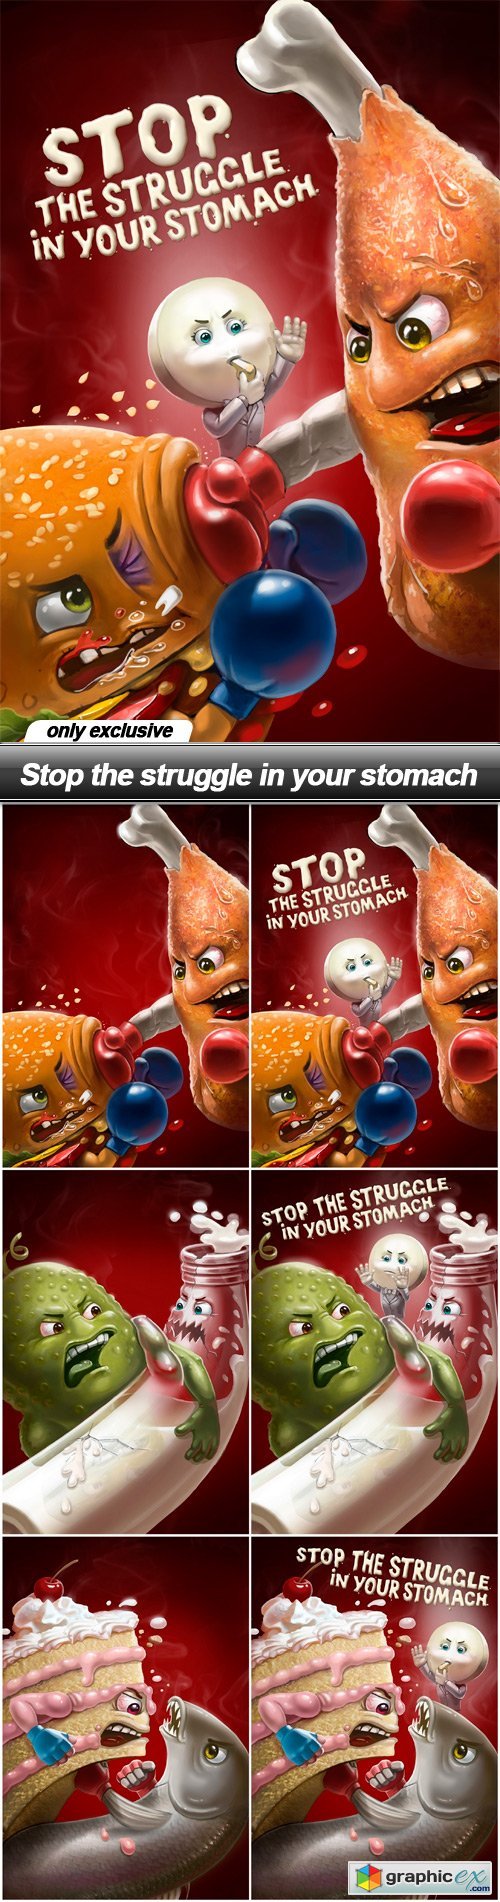 Stop the struggle in your stomach - 6 UHQ JPEG